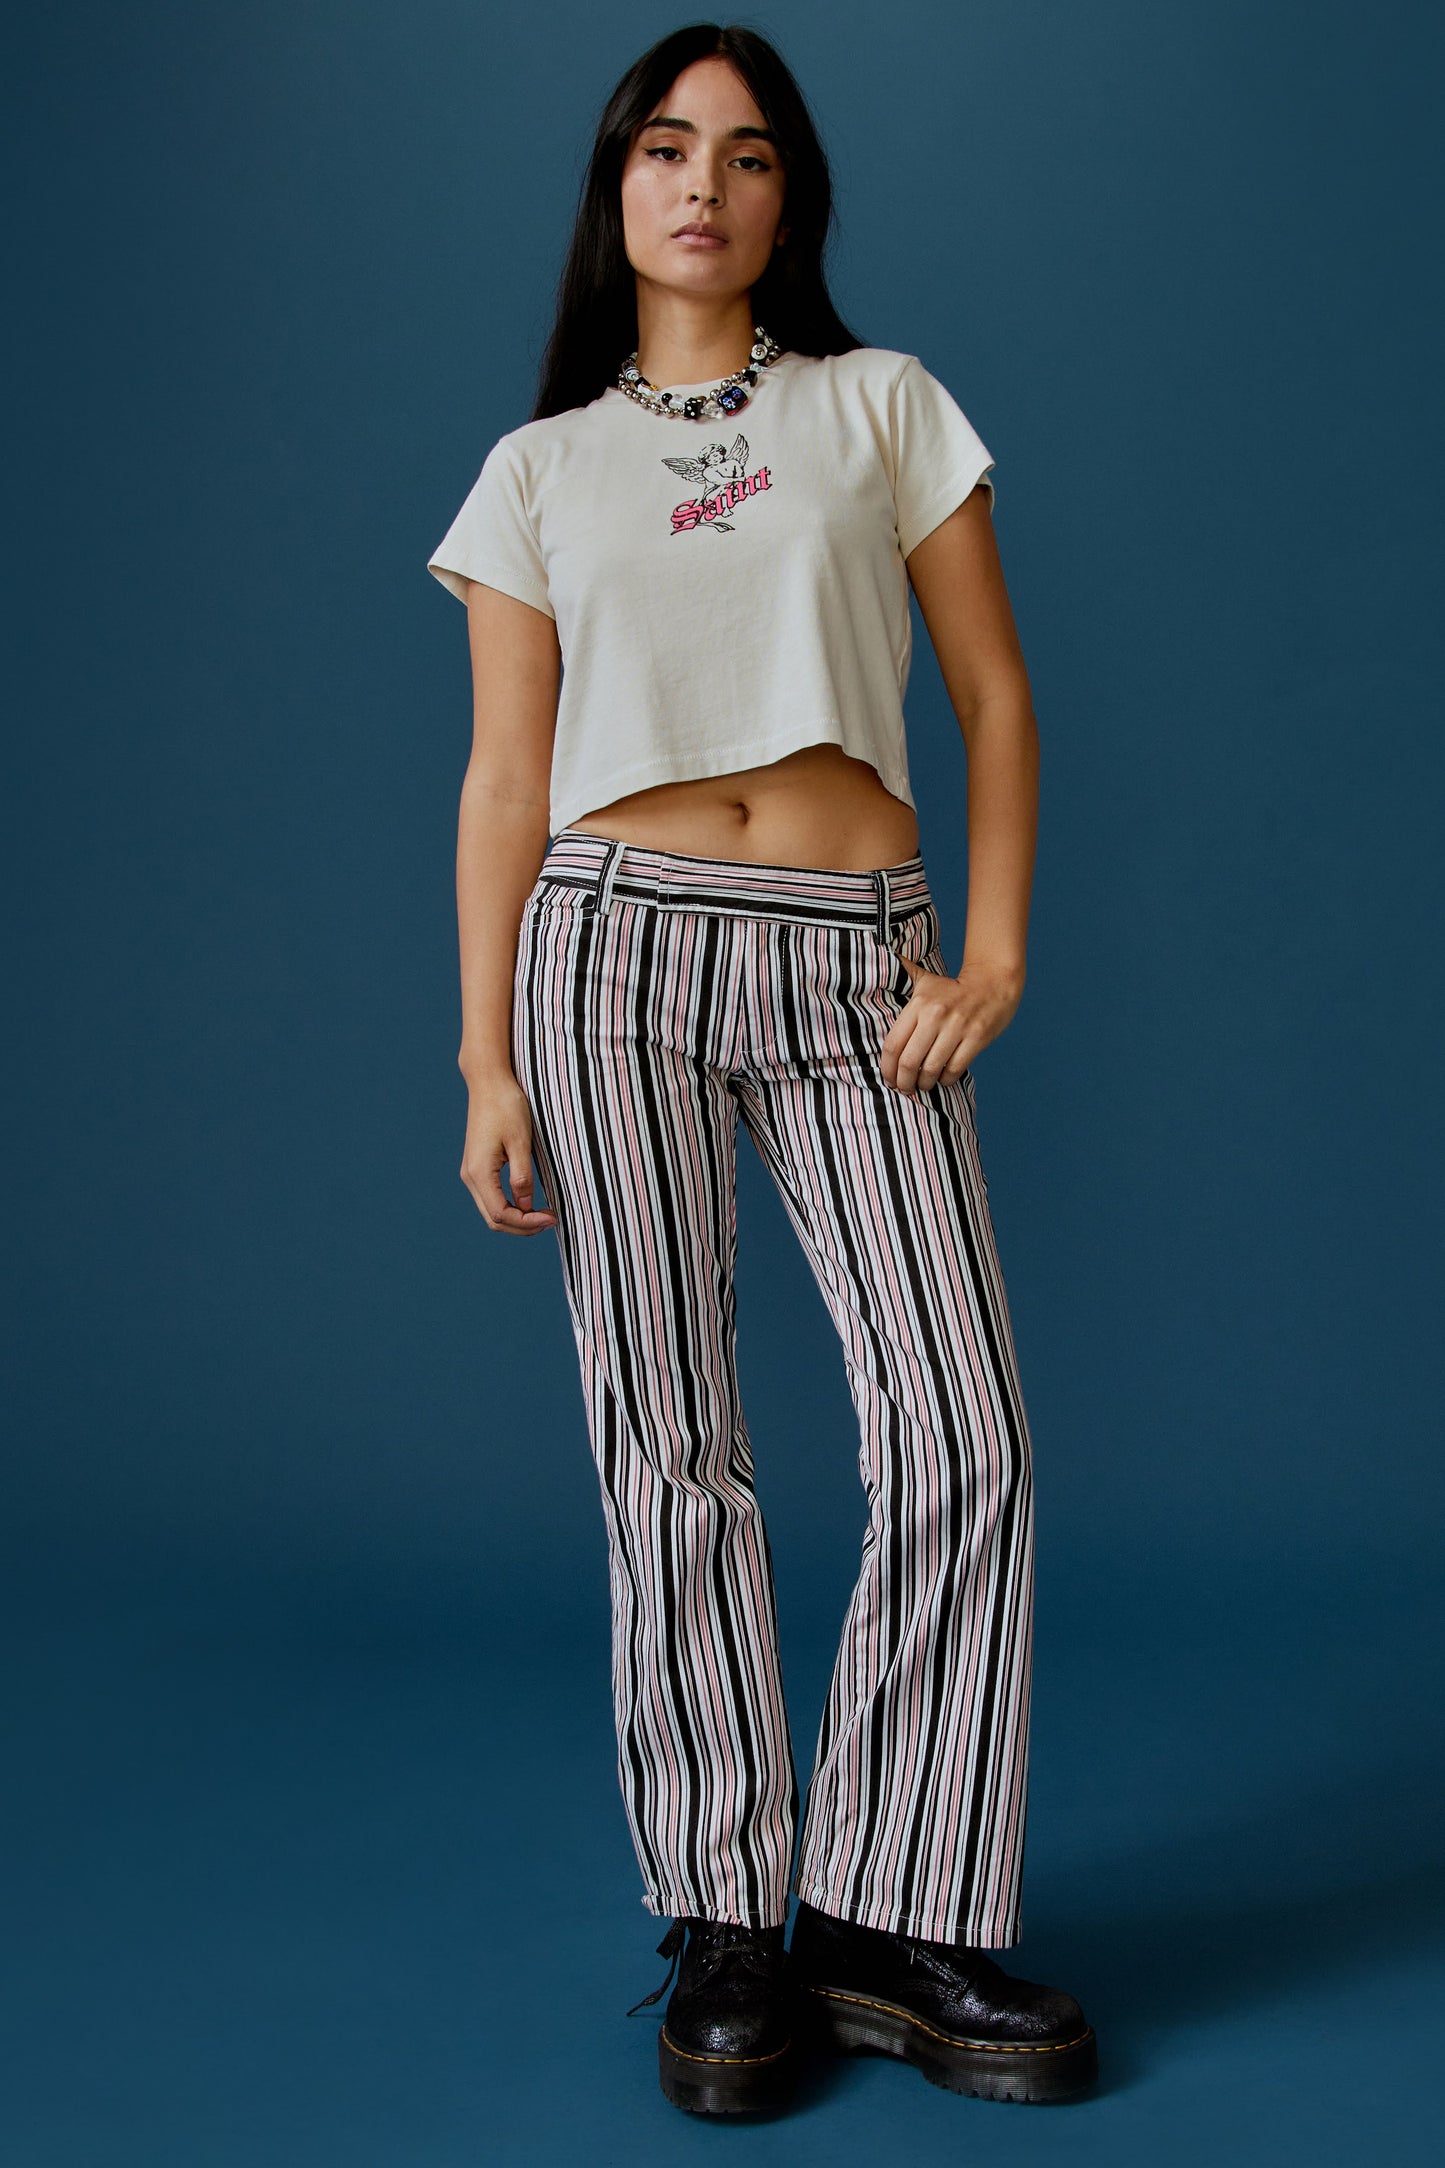 A dark-haired model features a white cropped tee designed with a baby angel in the center, stamped with 'Saint' in pink font in front.